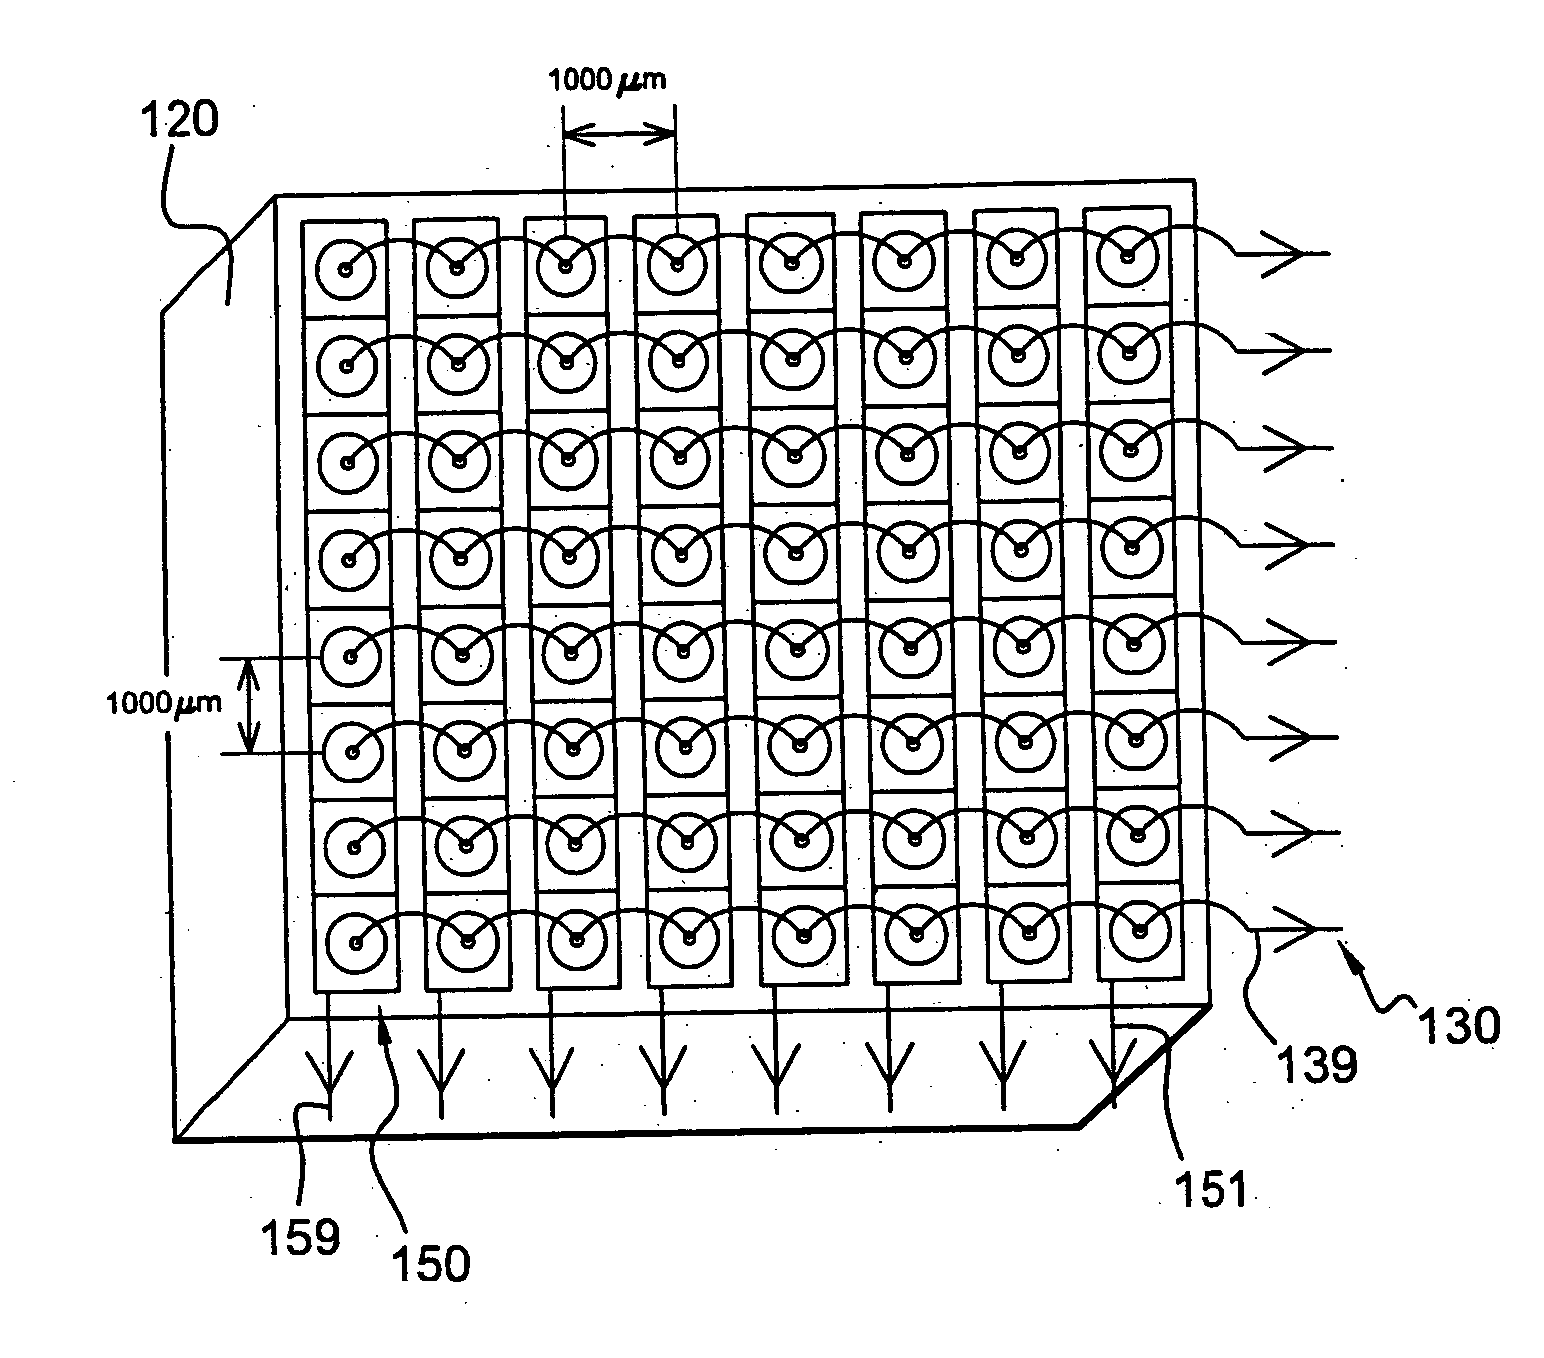 Device with stacked electrodes for detecting radiation and method of detecting ionizing radiation that uses such a device